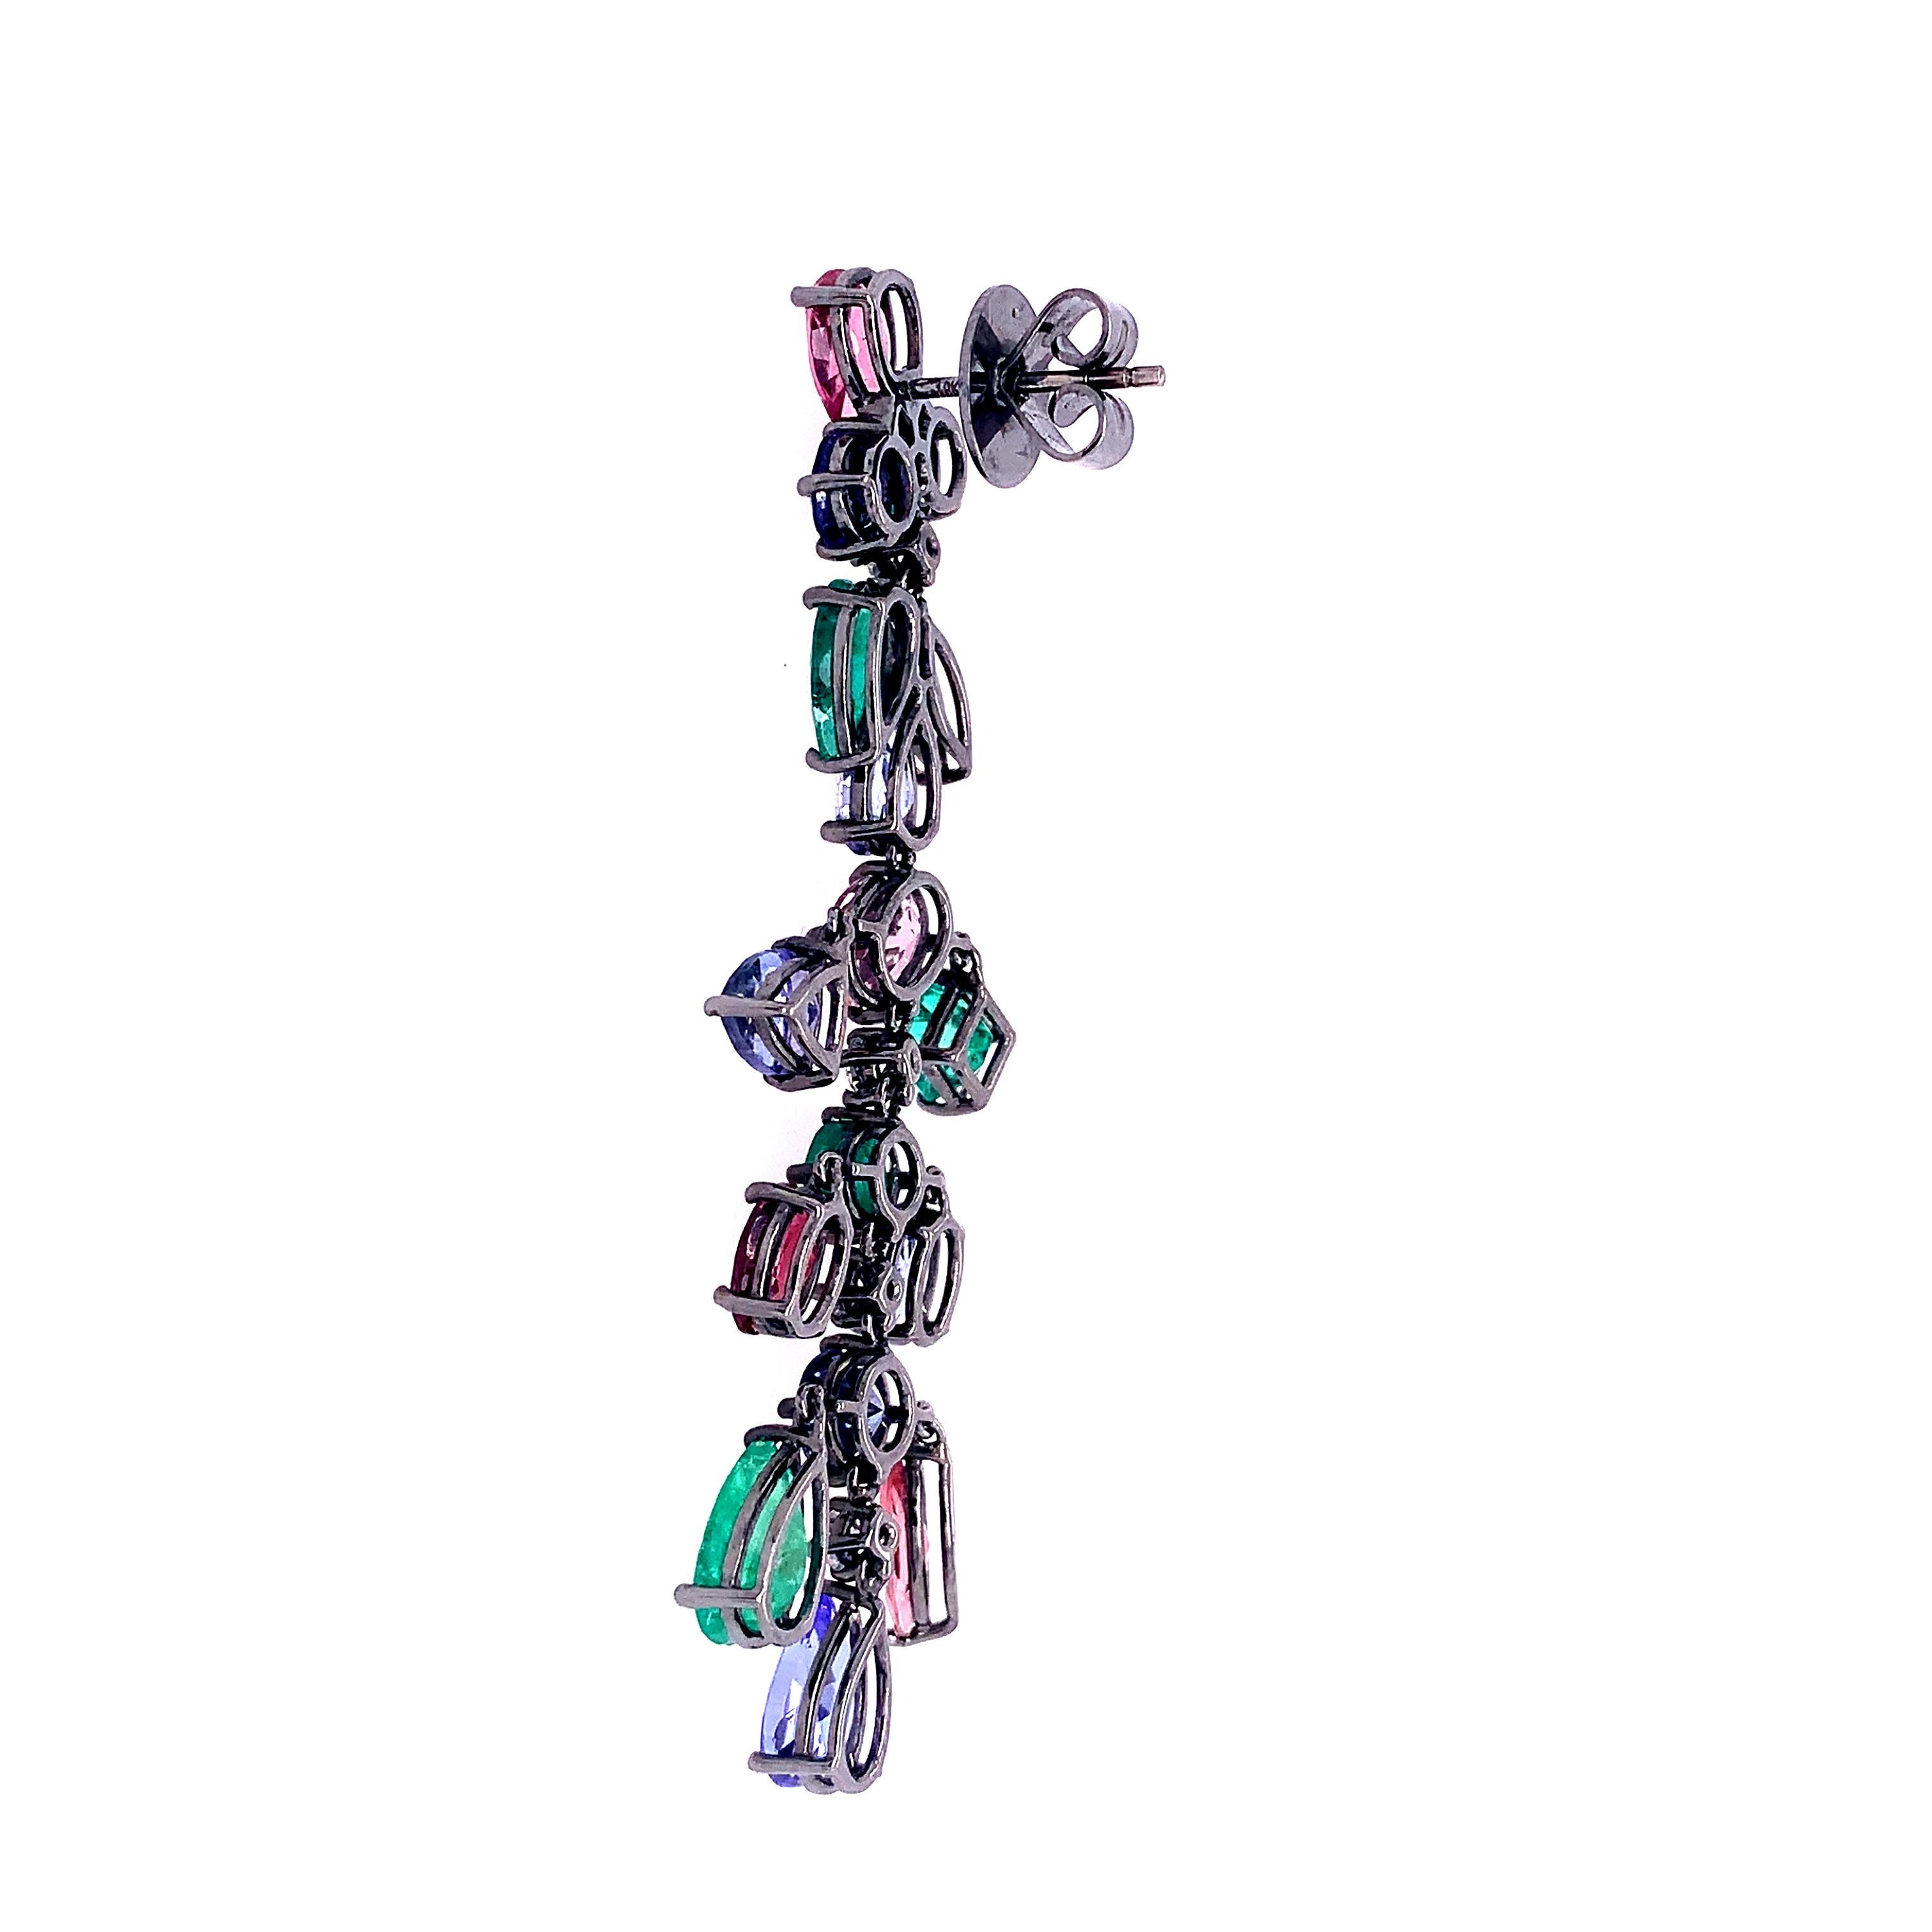 18K Black Gold
Emerald: 5.20 ct total weight.
Pink Tourmaline & Tanzanite: 11.53 ct total weight.
Diamond: 0.50 ct total weight.
All diamonds are G-H/SI stones.
